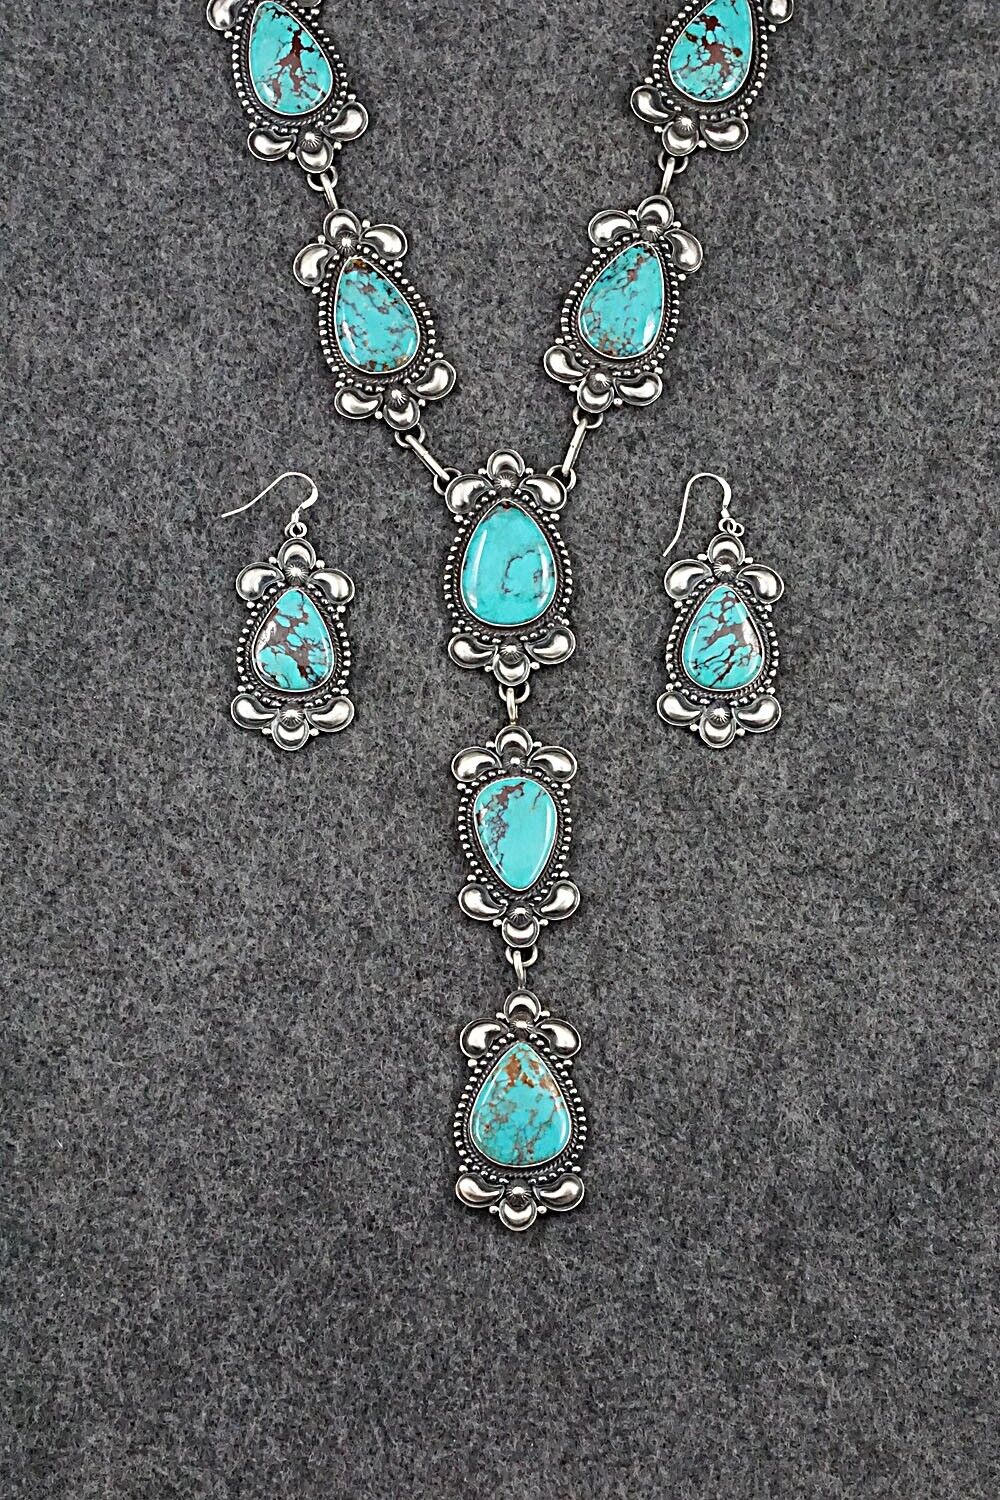 Turquoise & Sterling Silver Necklace and Earrings Set - Derrick Gordon